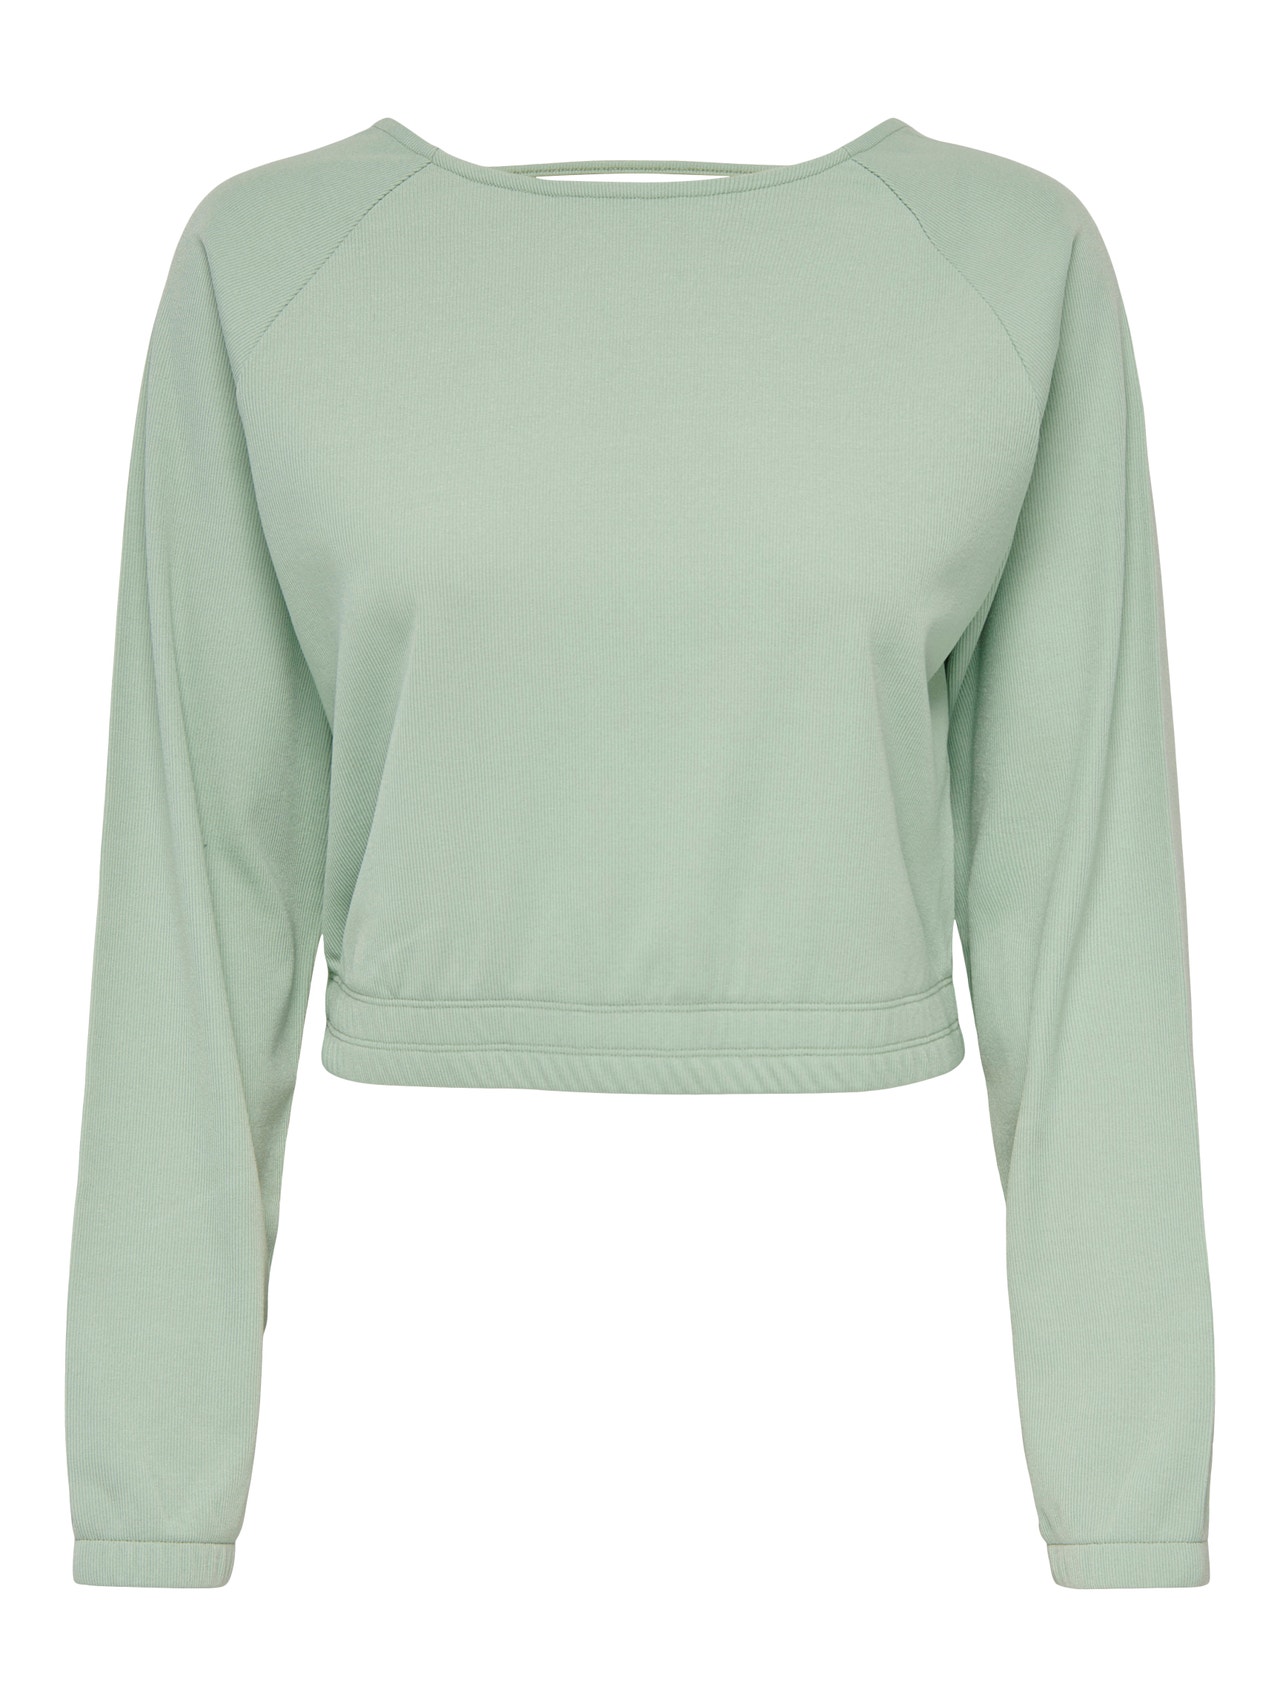 ONLY Cropped Top med åben ryg -Frosty Green - 15244796